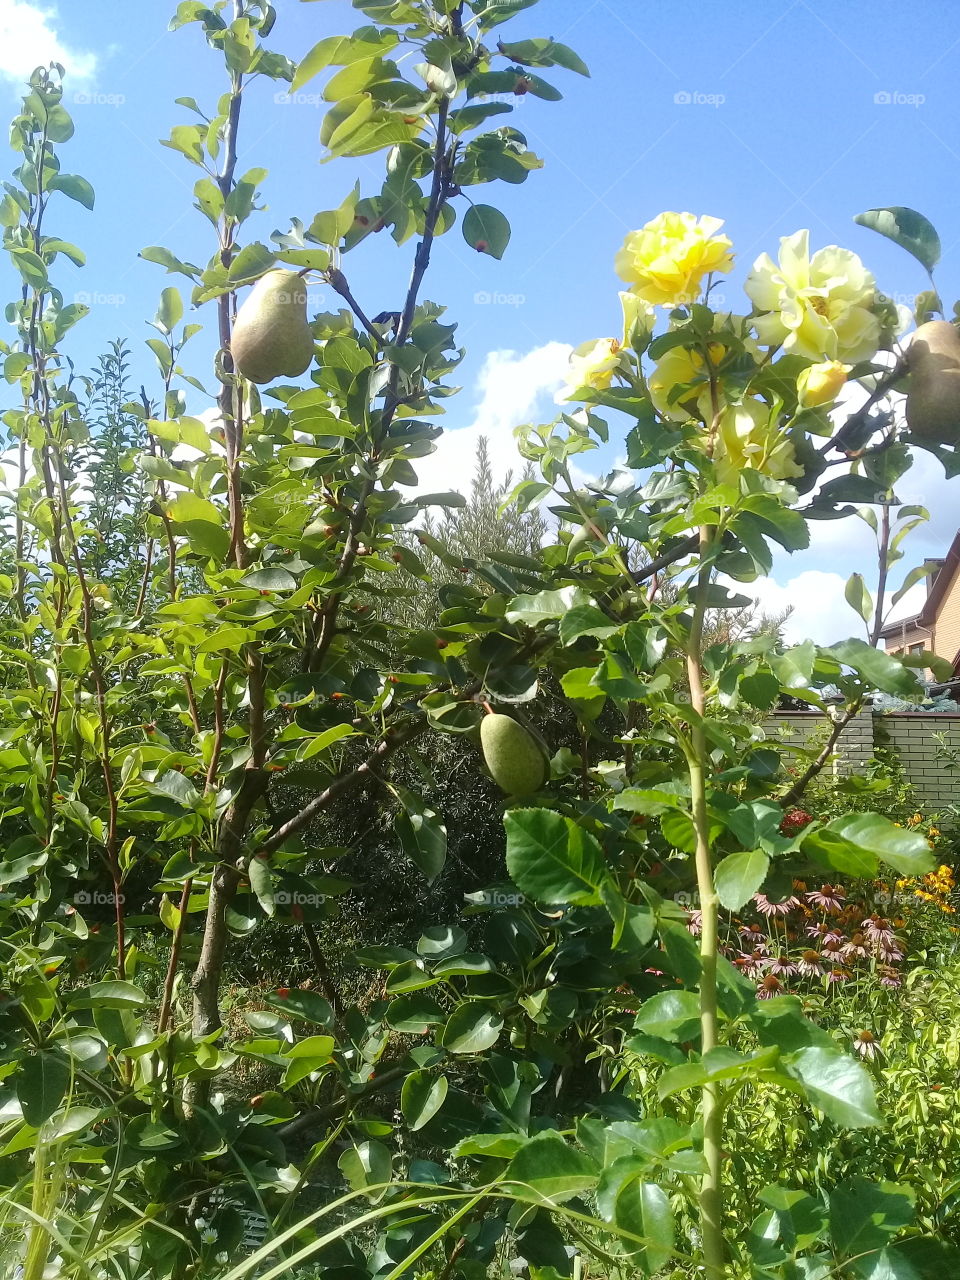 I am found of roses and pears.